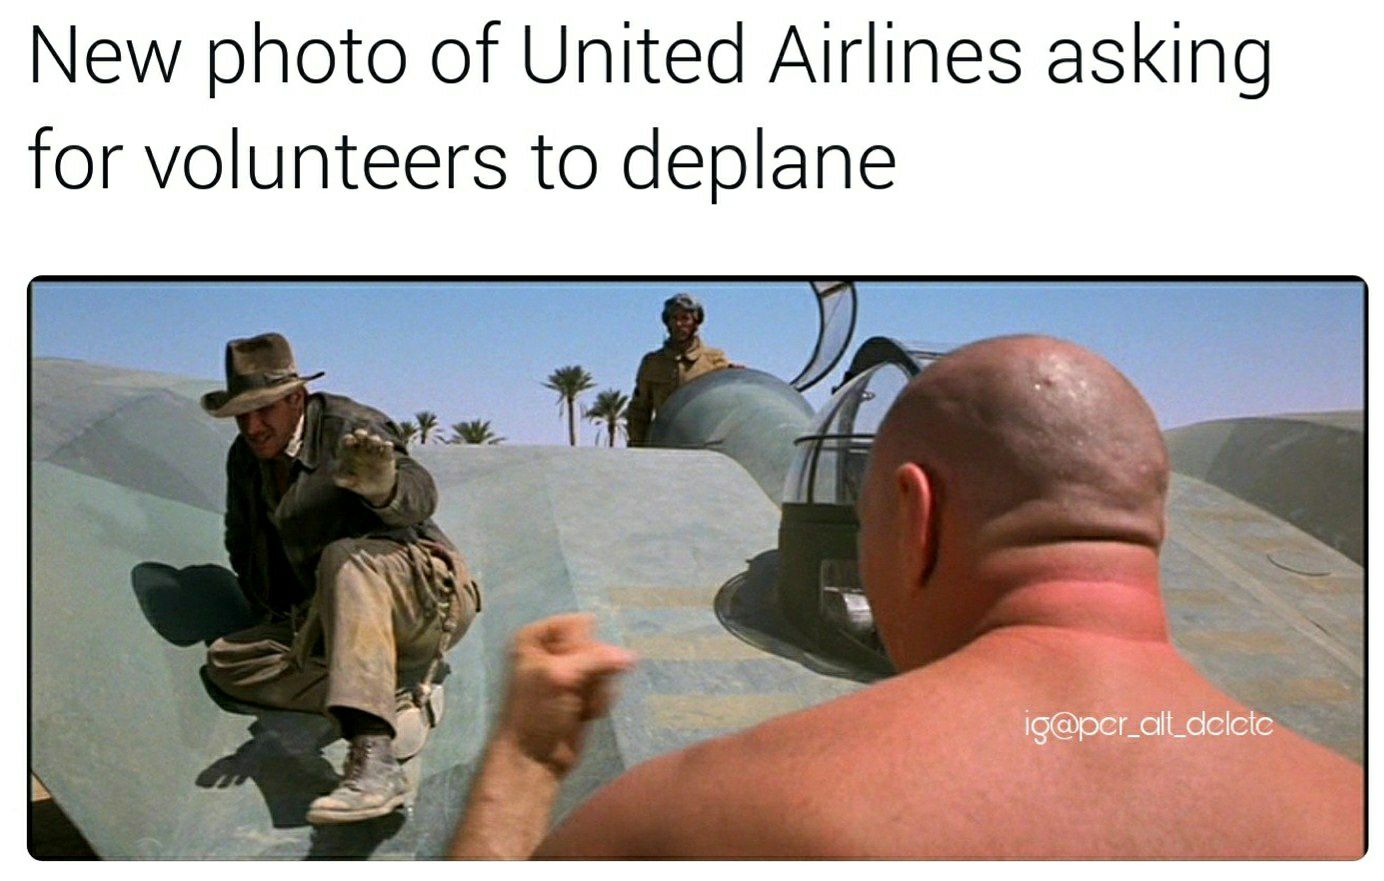 memes - german mechanic indiana jones - New photo of United Airlines asking for volunteers to deplane i